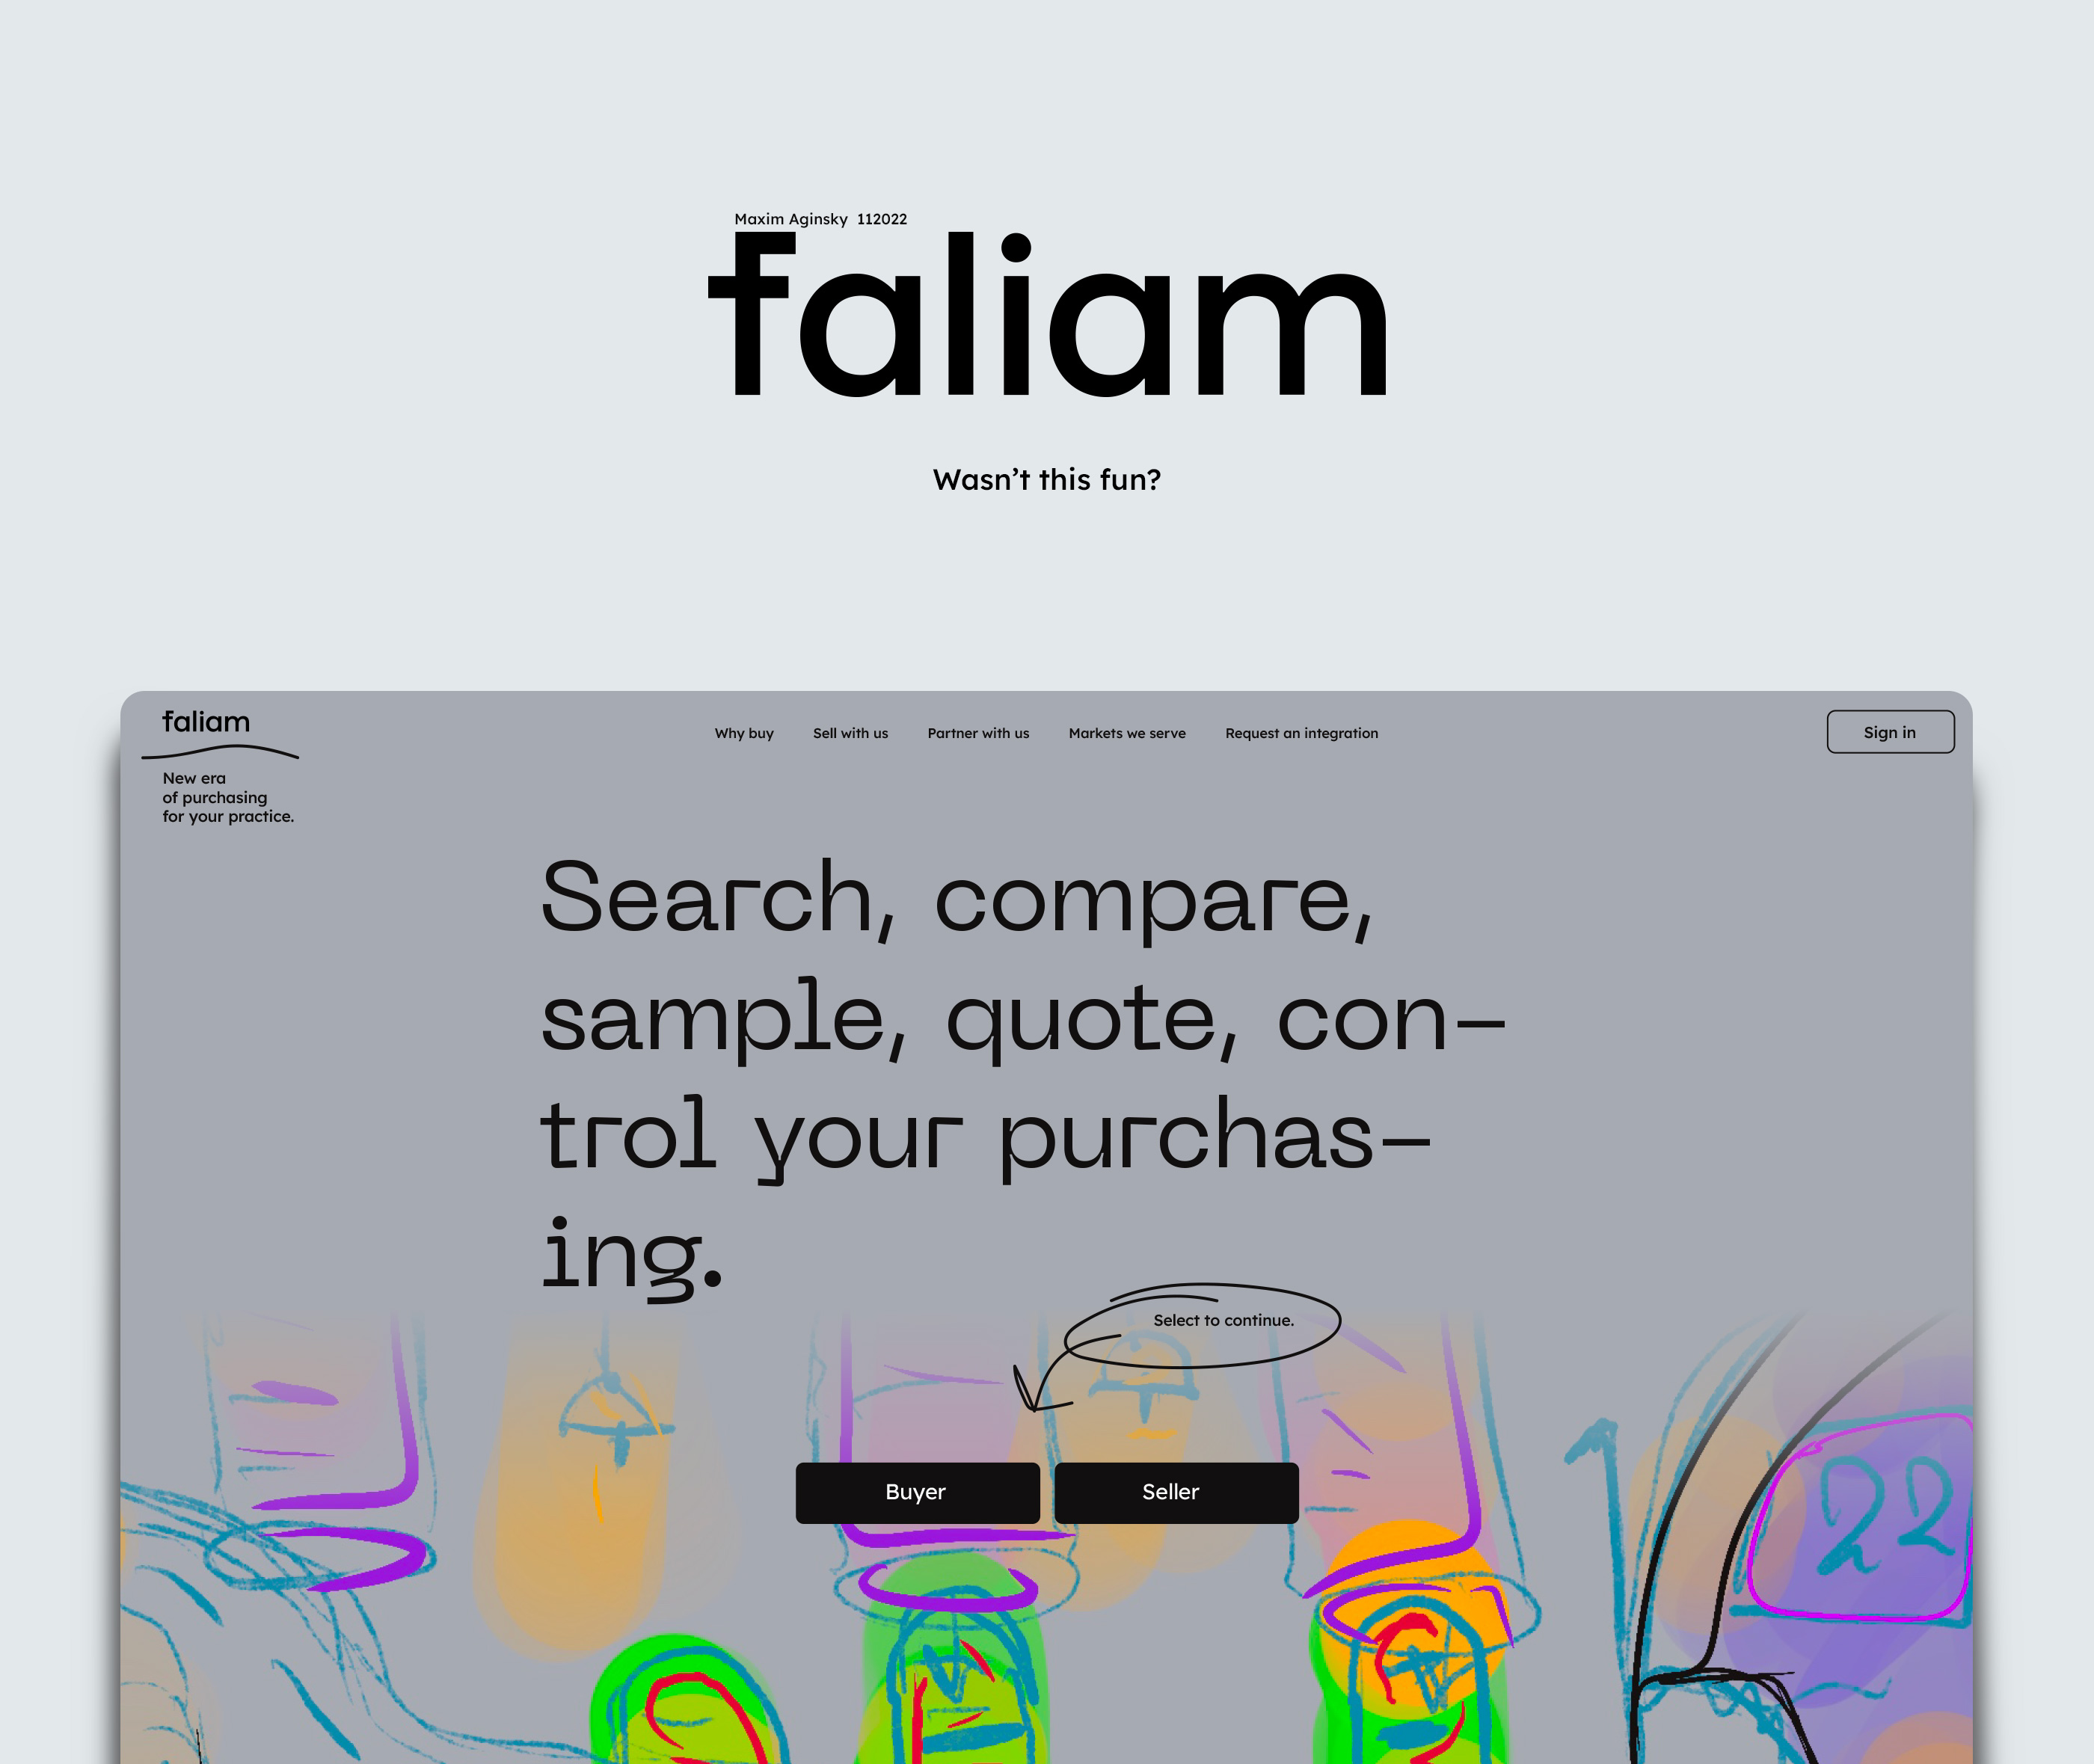 How do you make Faliam the face of design in the healthcare supply chain industry?